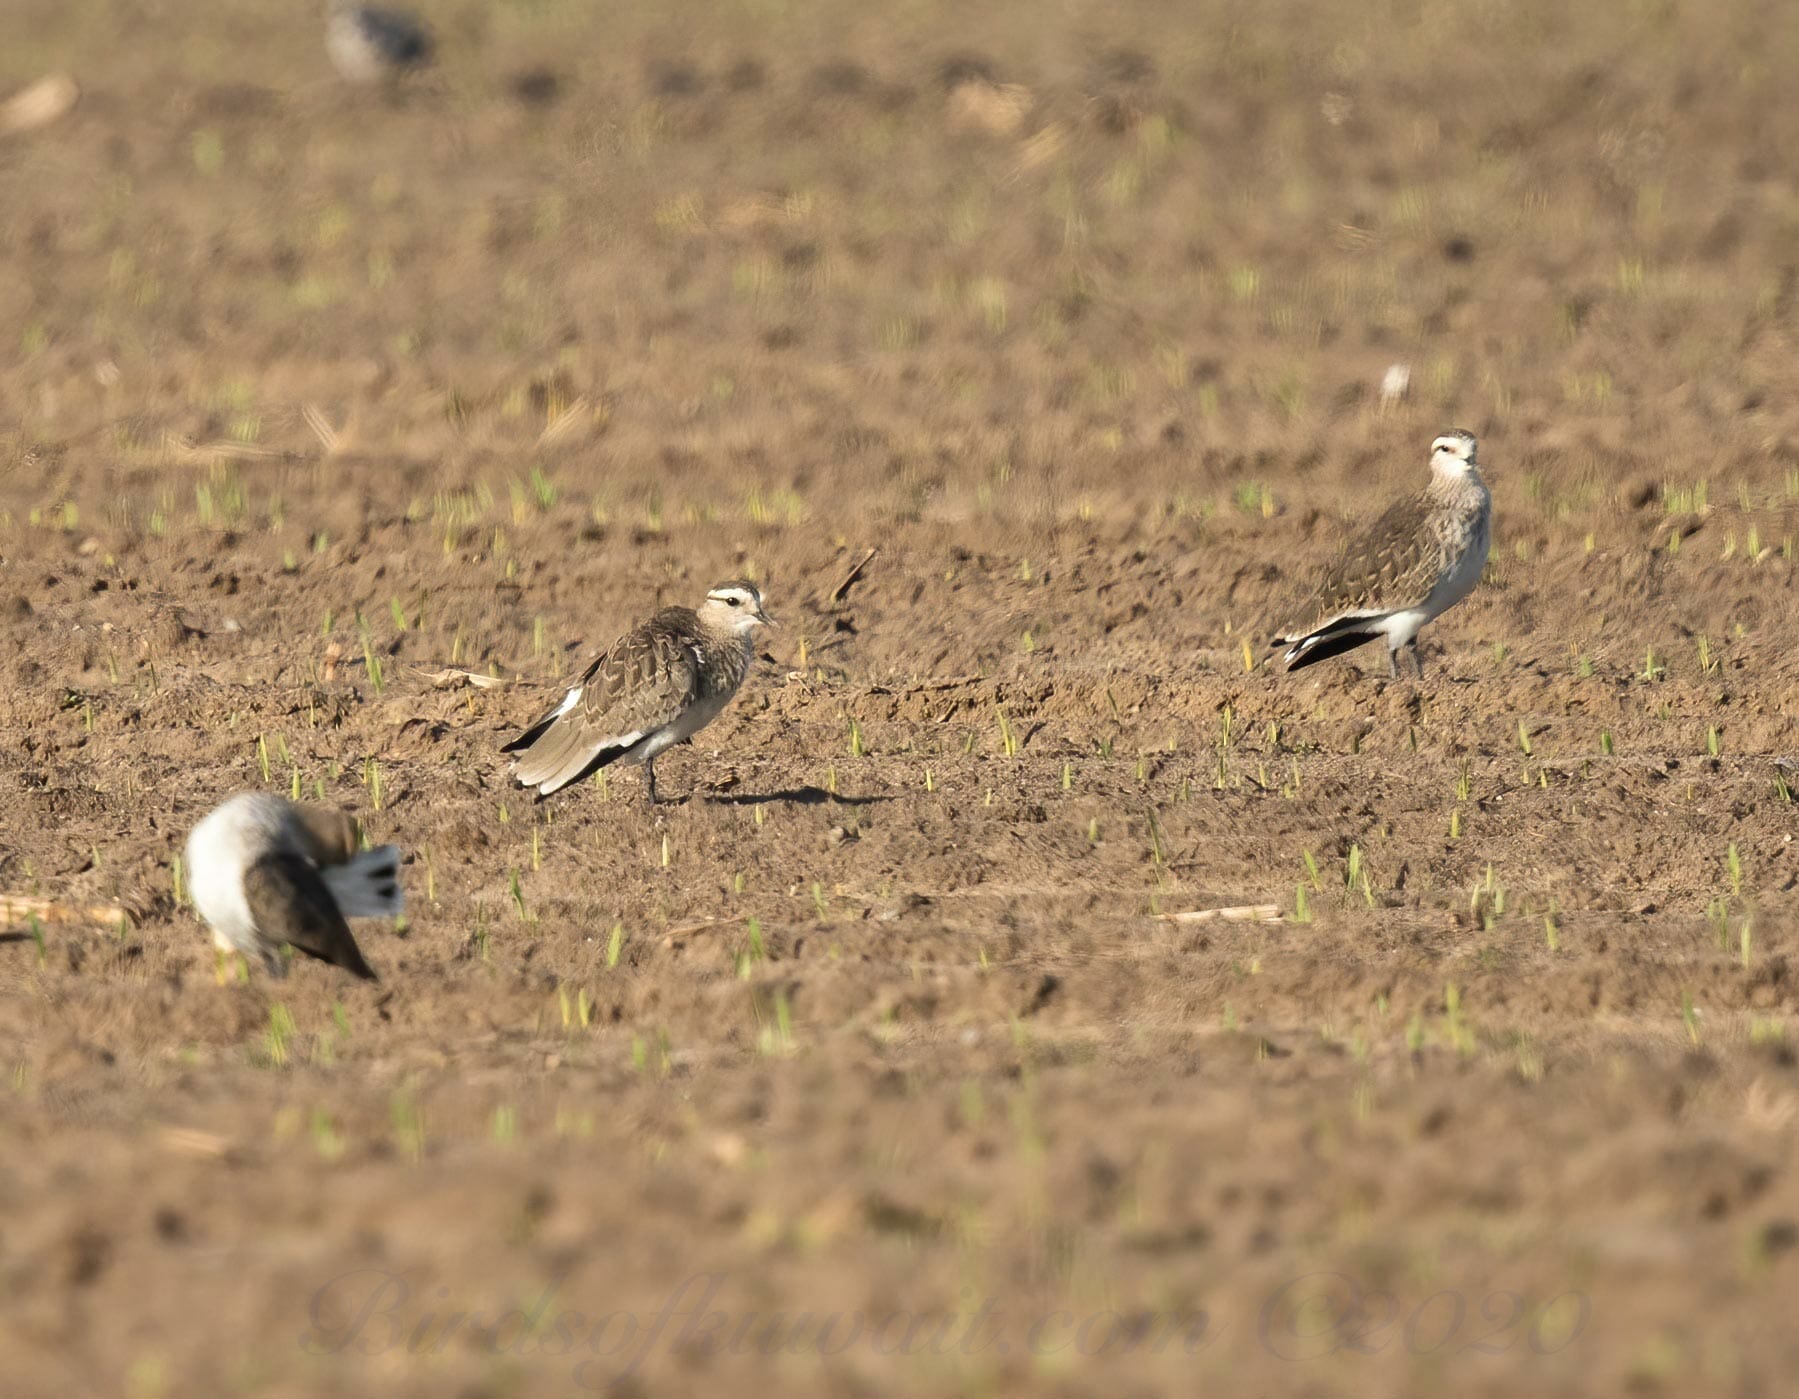 3 Sociable Lapwings standing on the ground